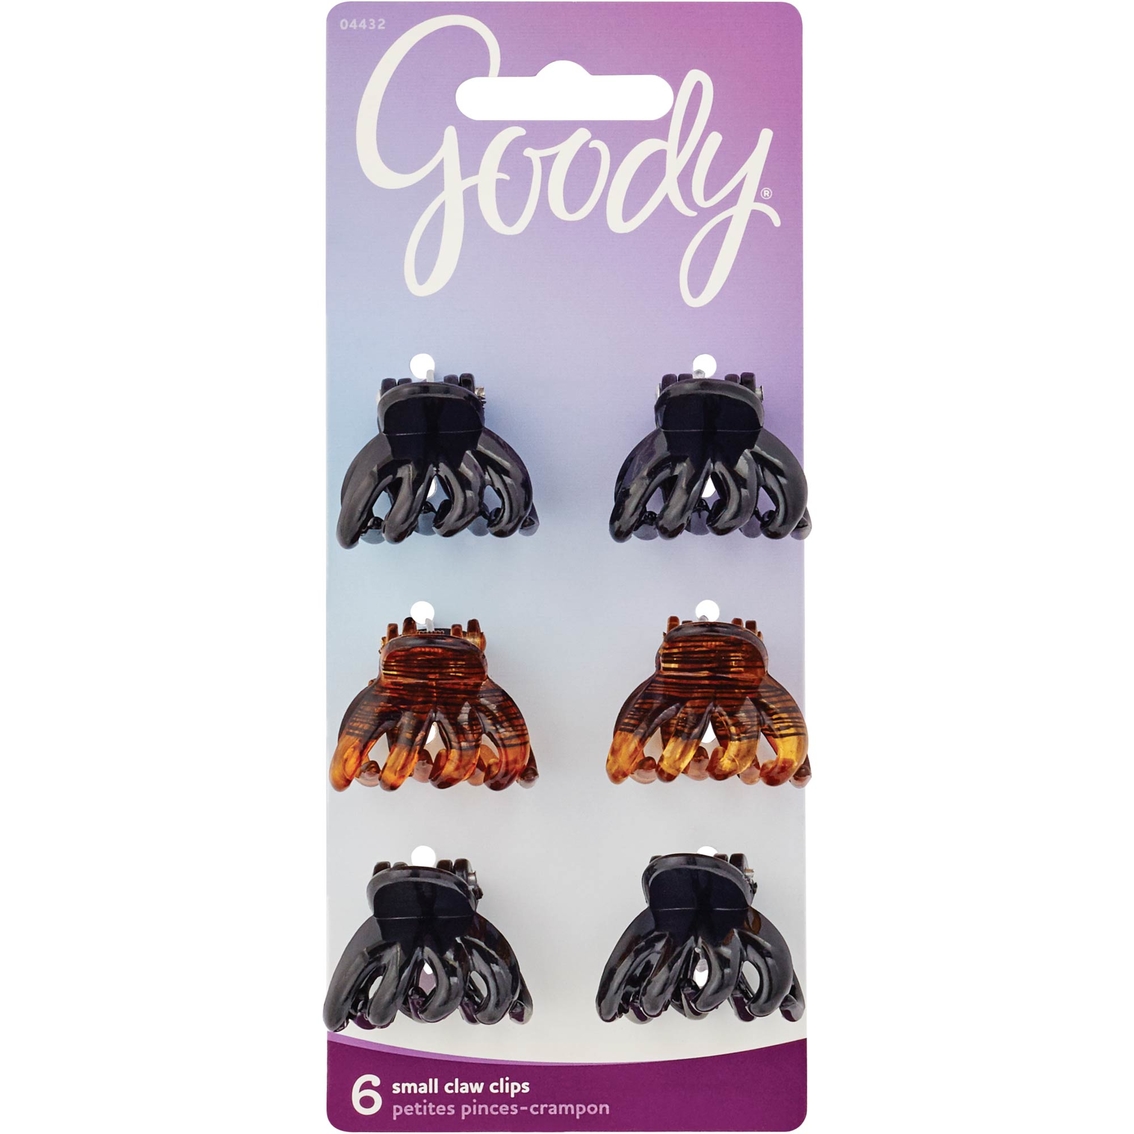 Goody Claw Clips Small Spider Black UPC: 041457044322 Pack:72